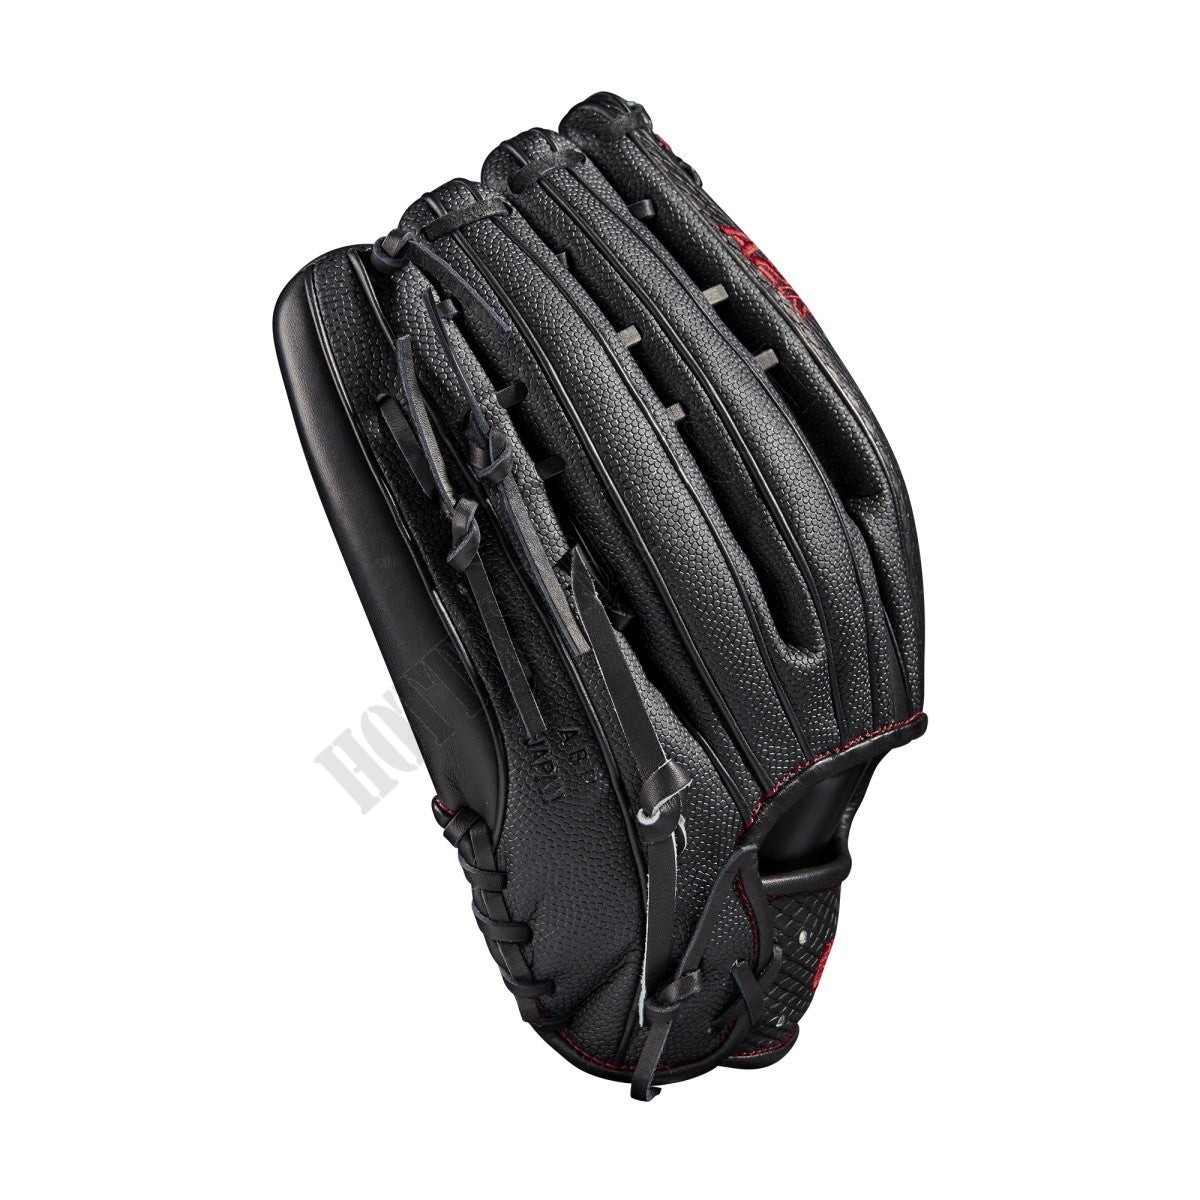 2021 A2K 1775SS 12.75" Outfield Baseball Glove ● Wilson Promotions - -4